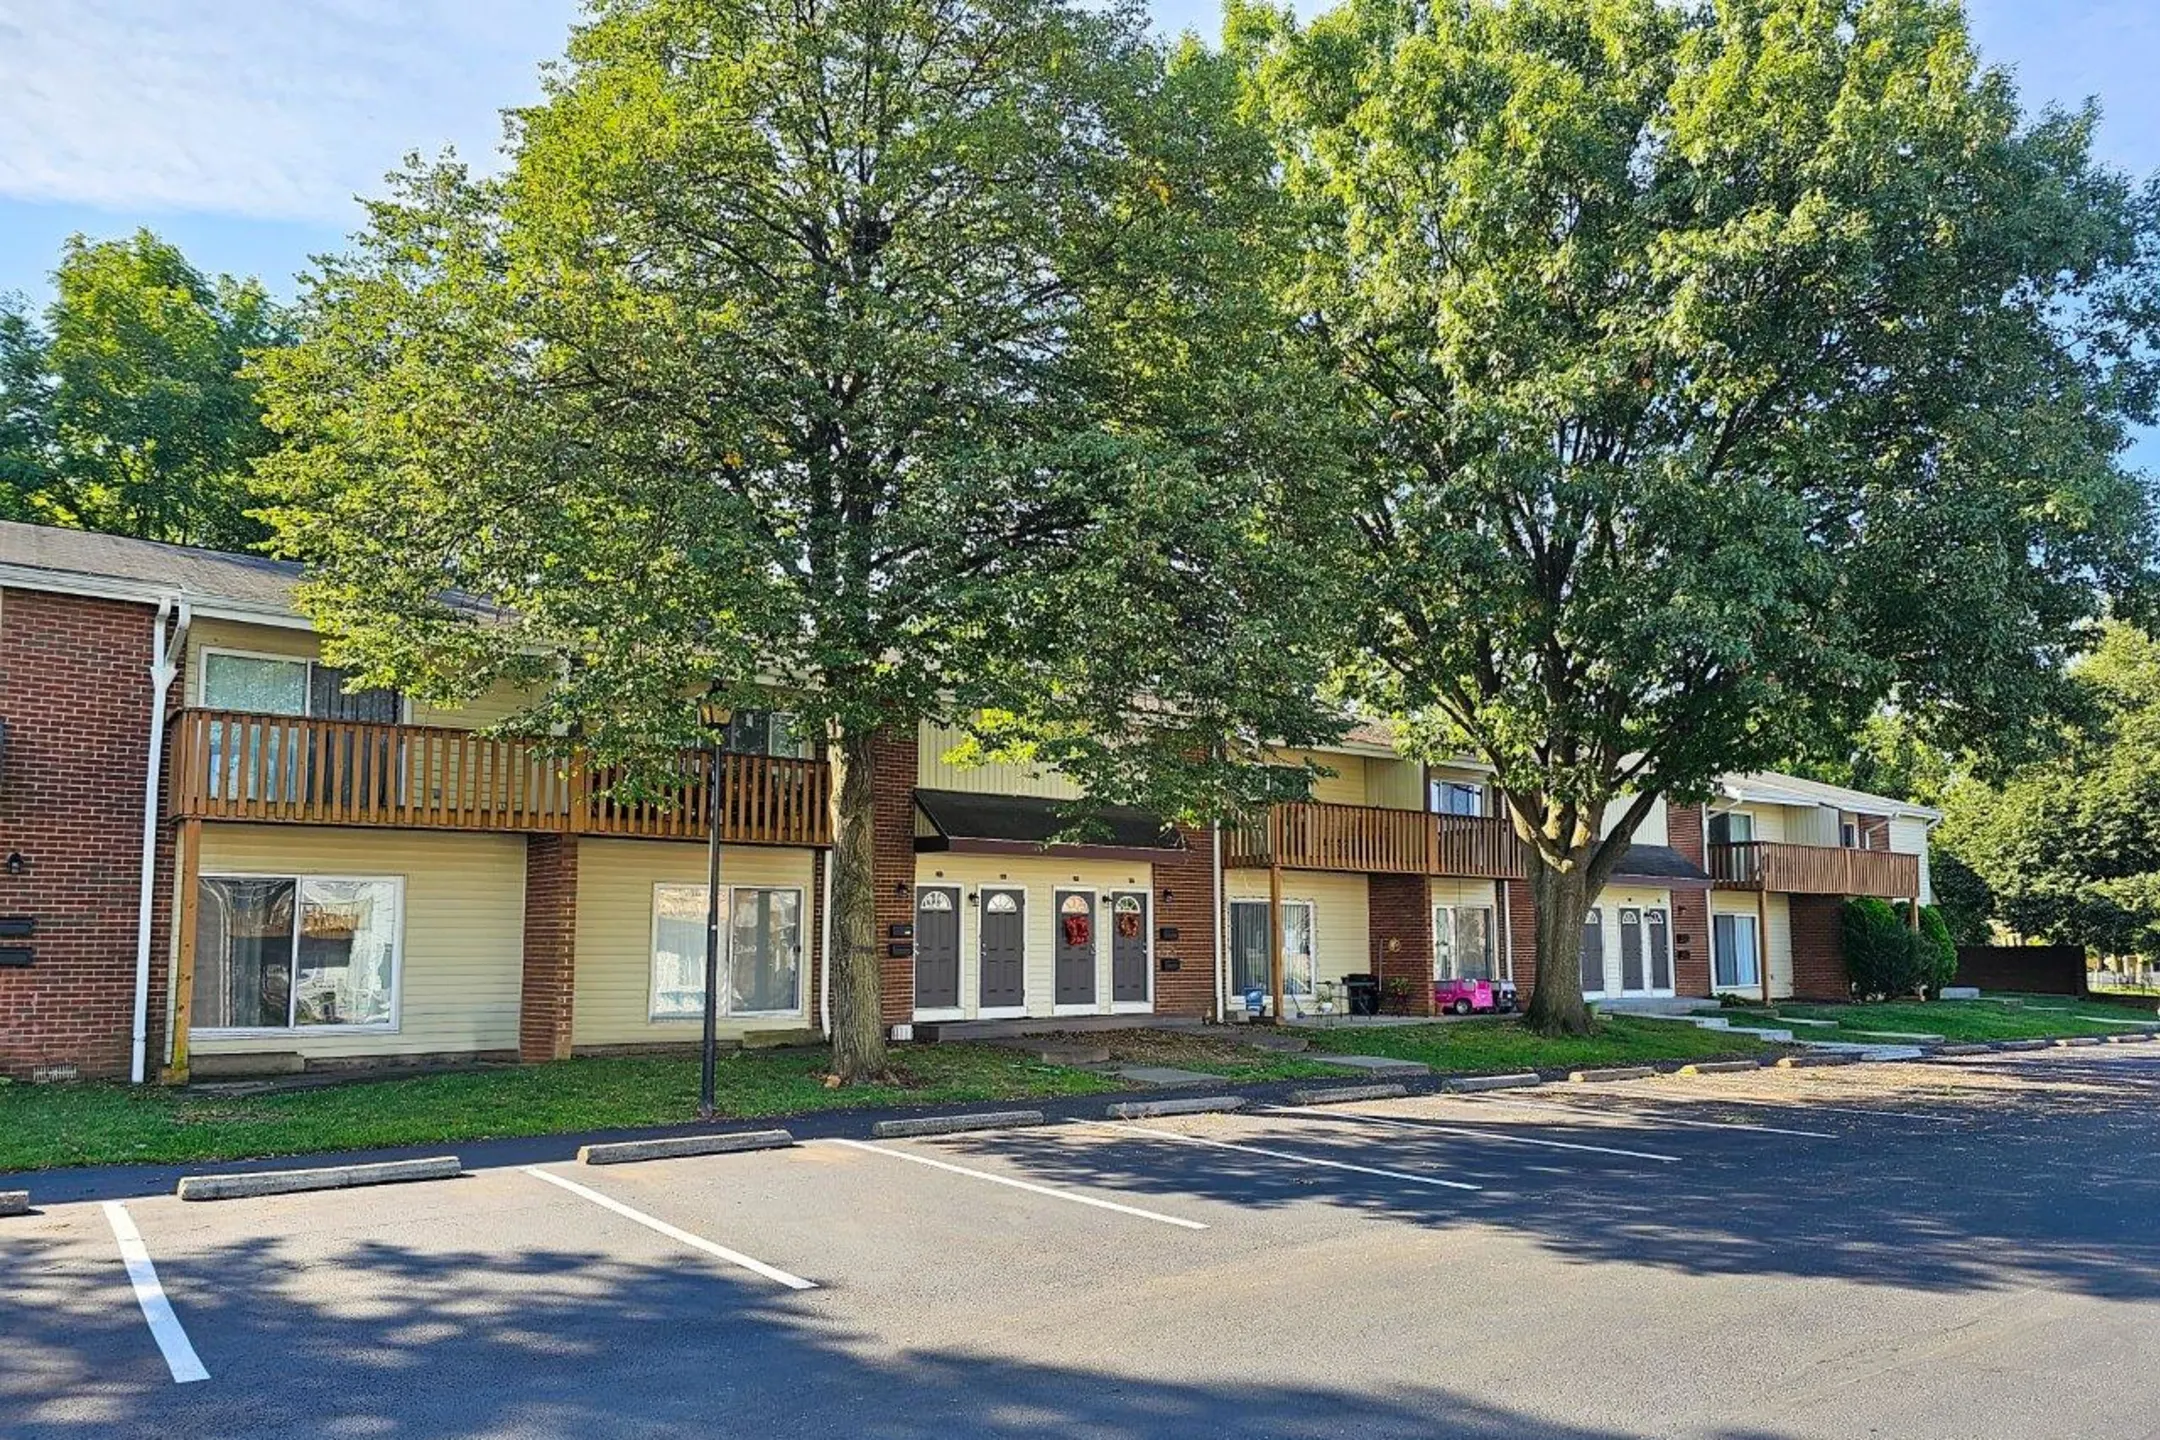 Building - Oxford Manor Apartments & Townhomes - Mechanicsburg, PA